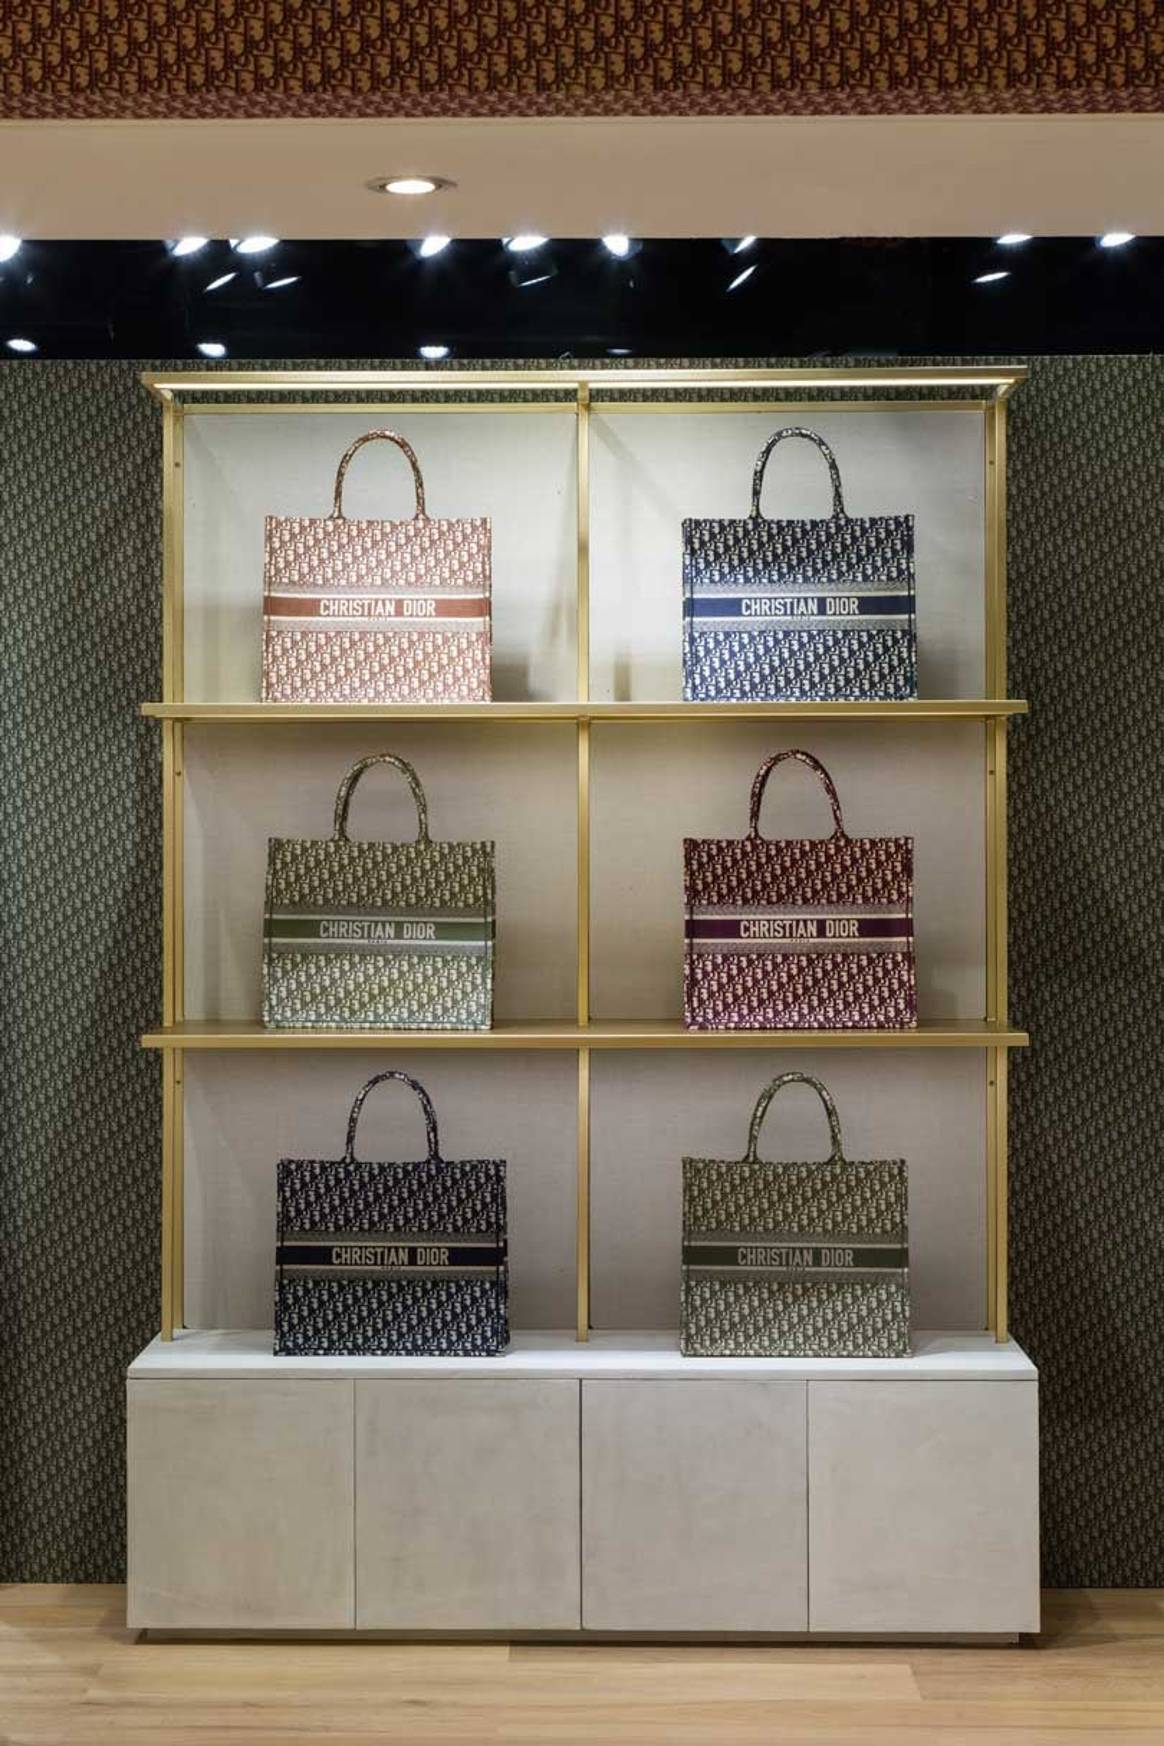 Dior to offer first-ever personalisation service in pop-up store at Harrods